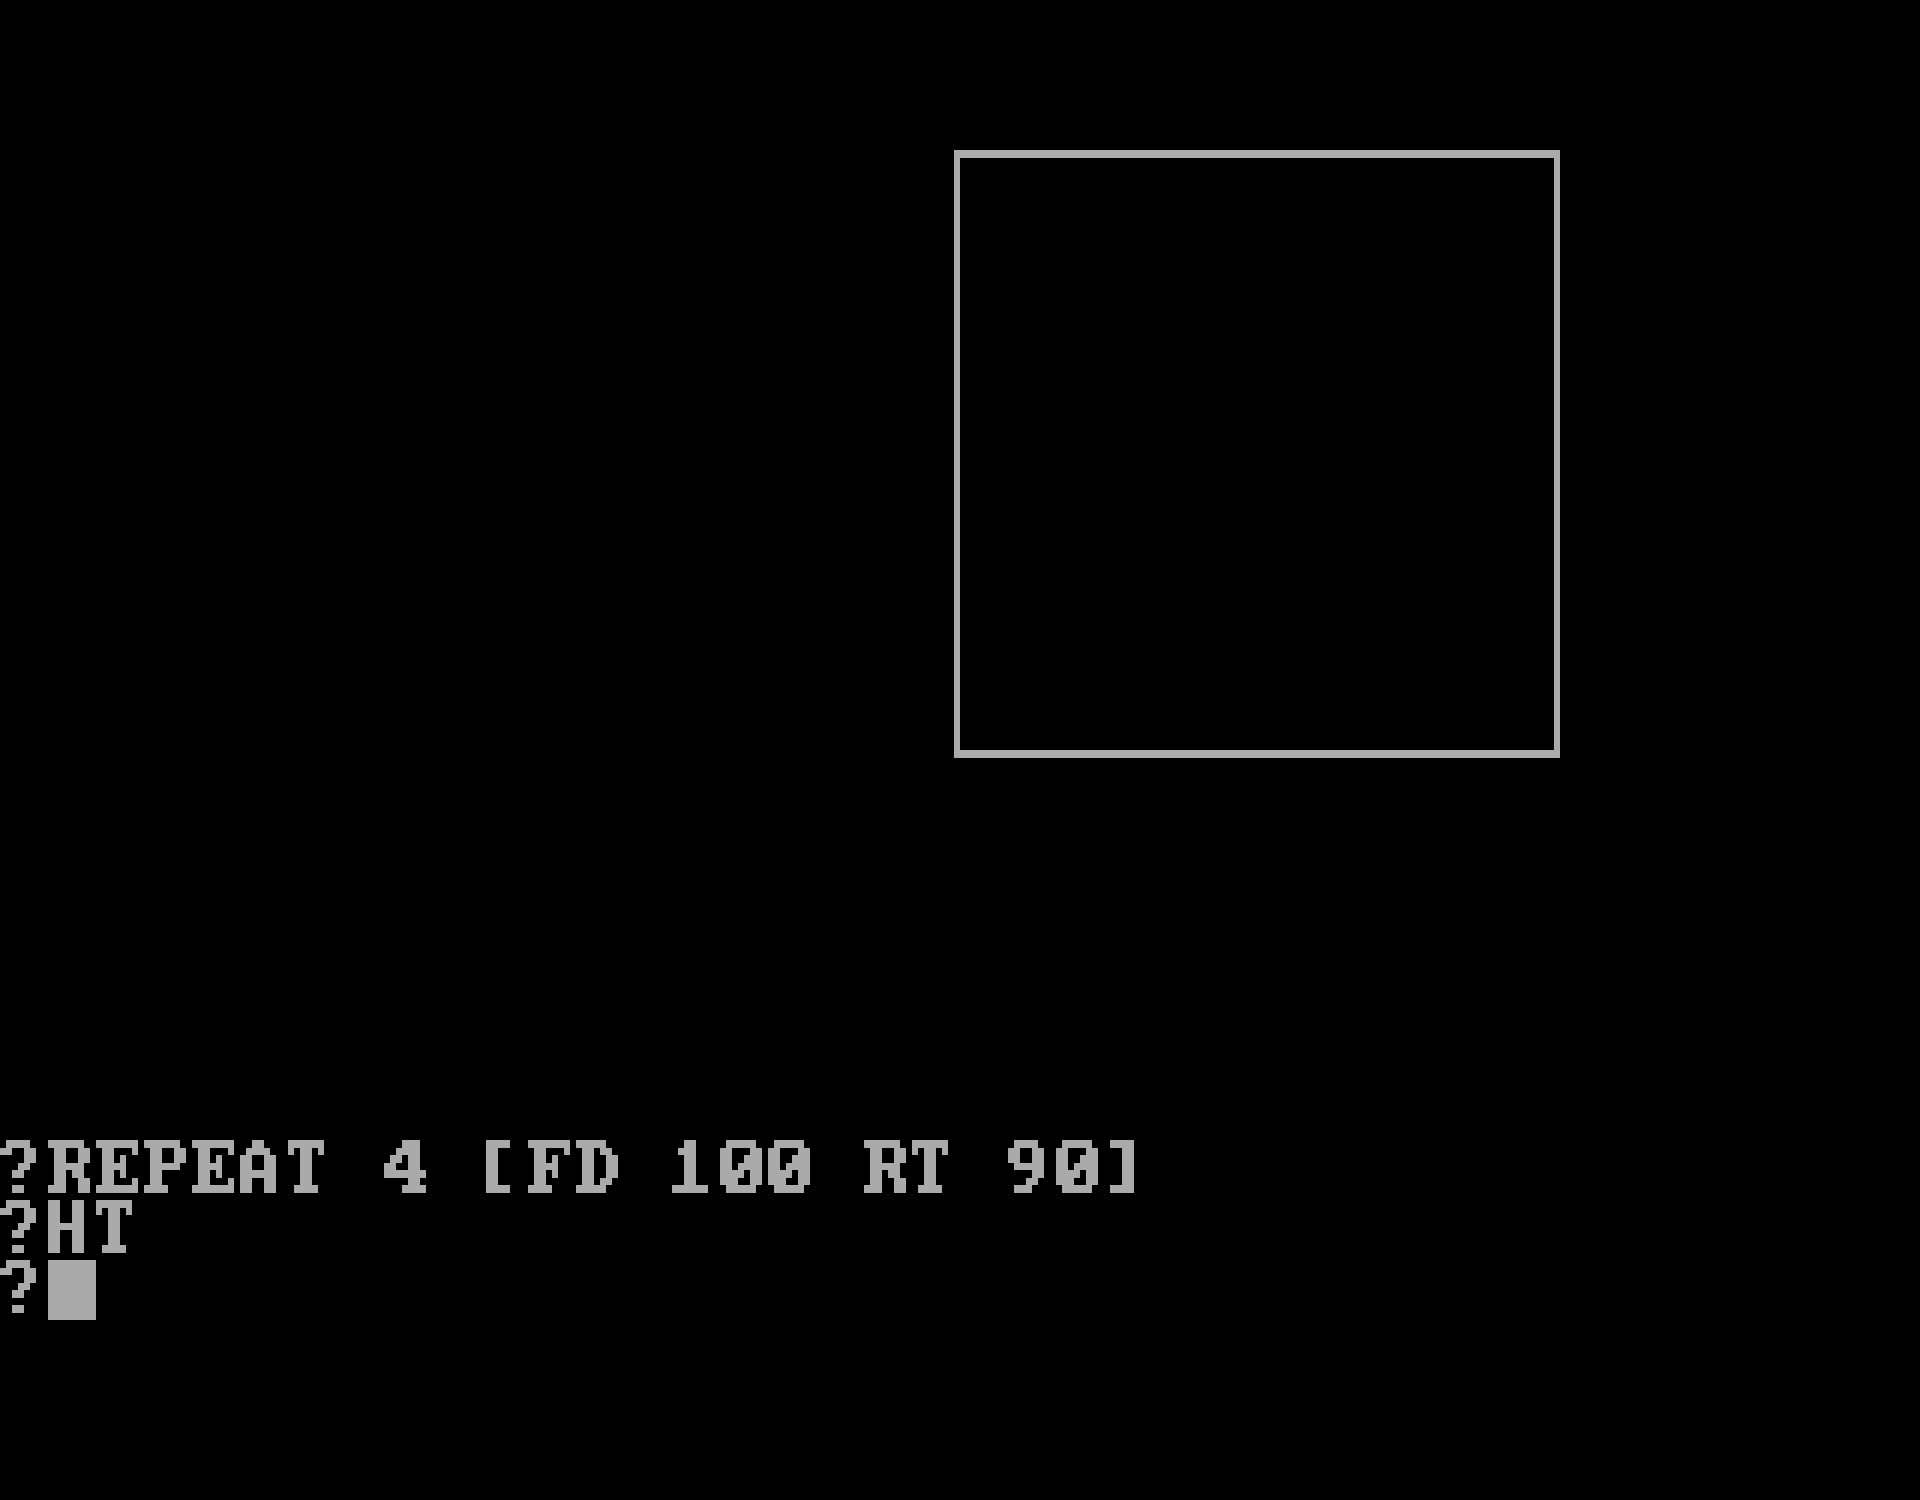 A square drawn with Logo along with source code